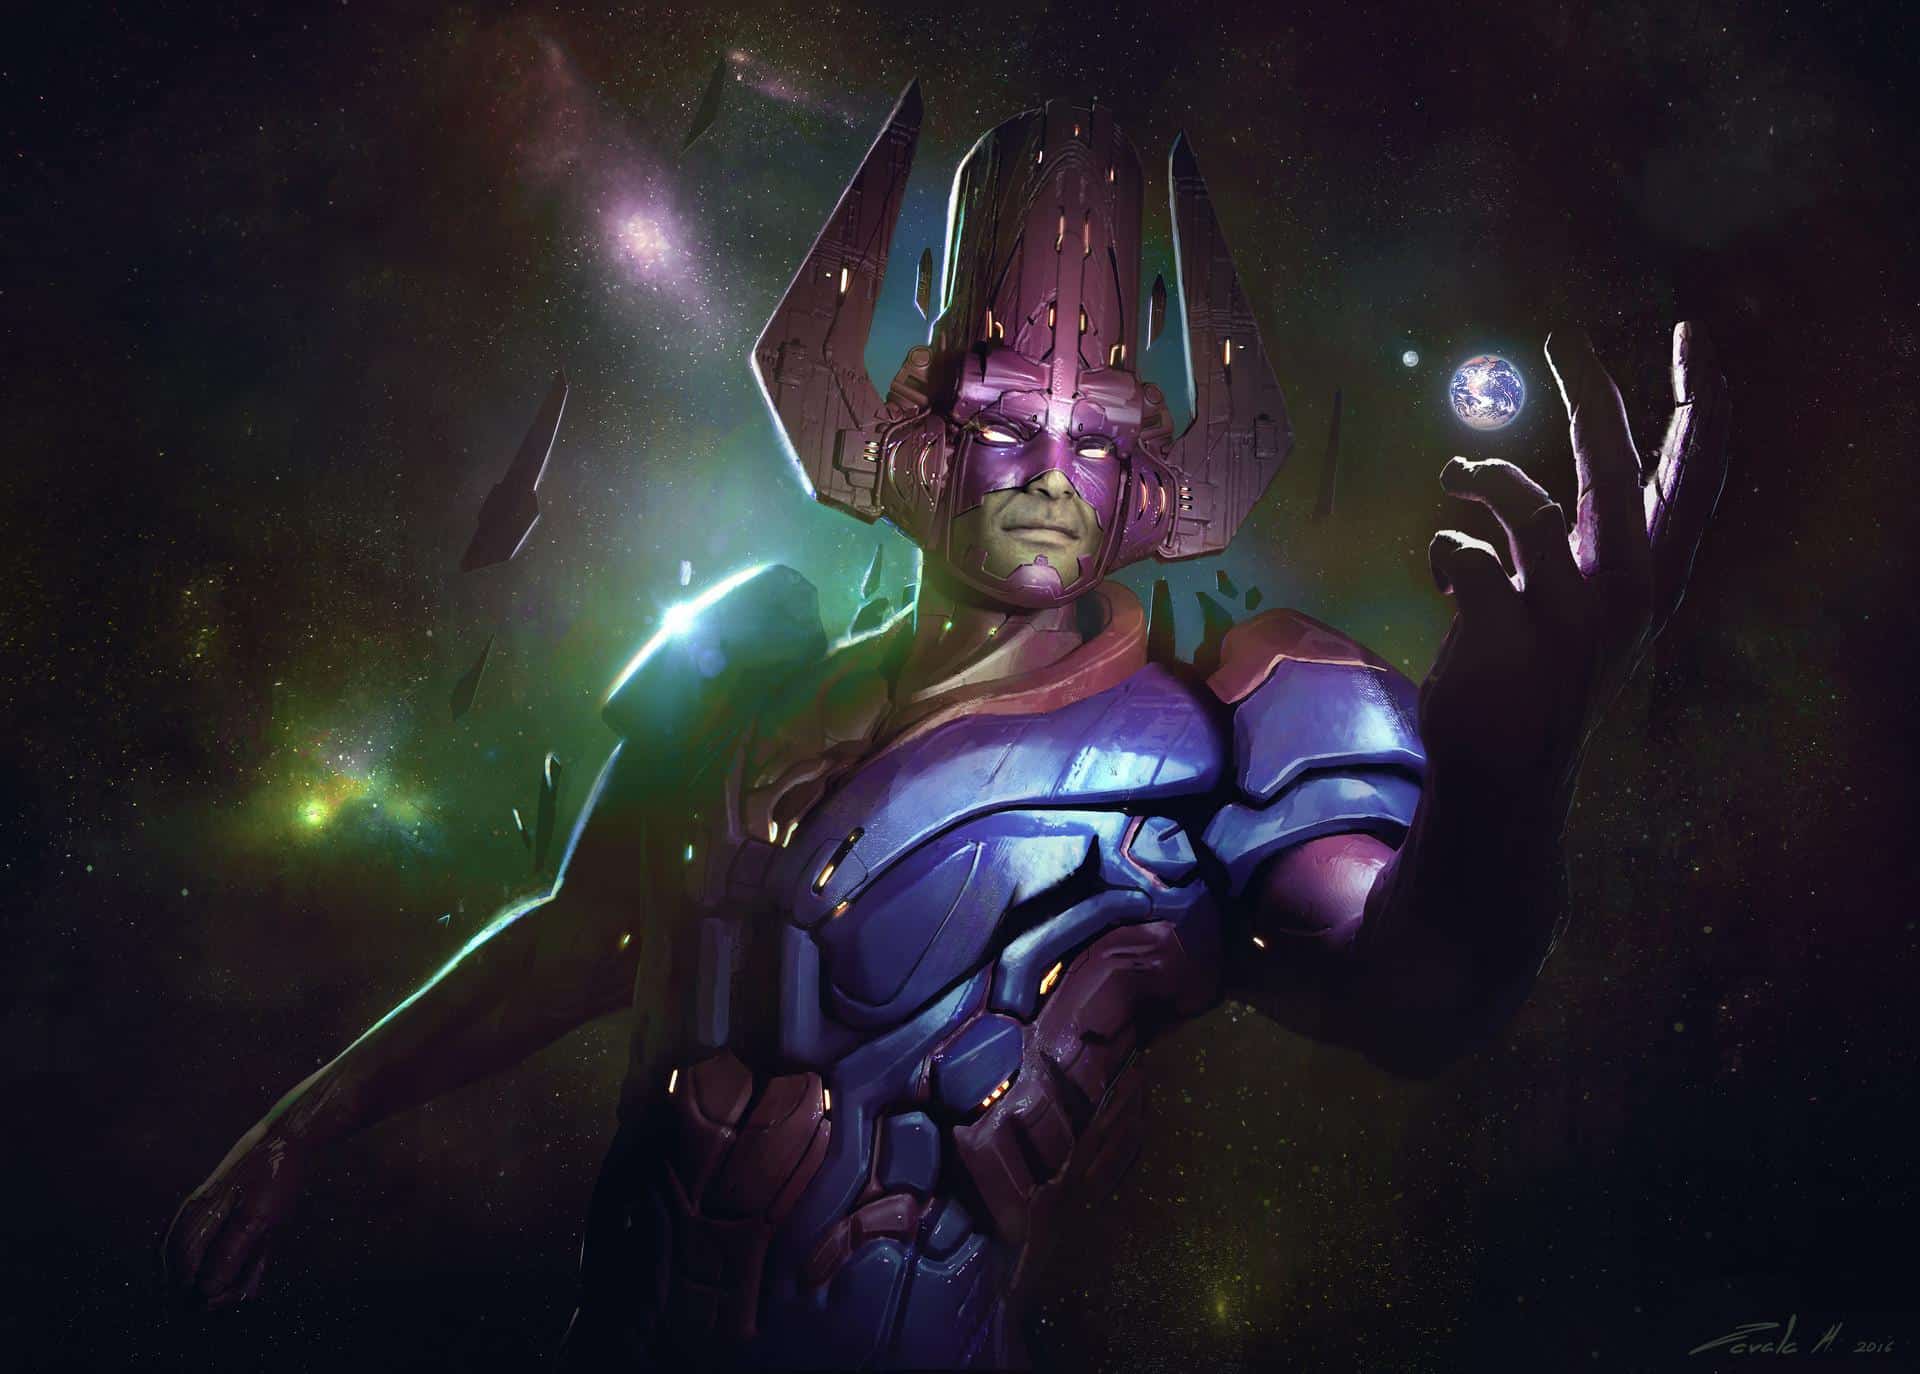 The mighty and powerful Galactus